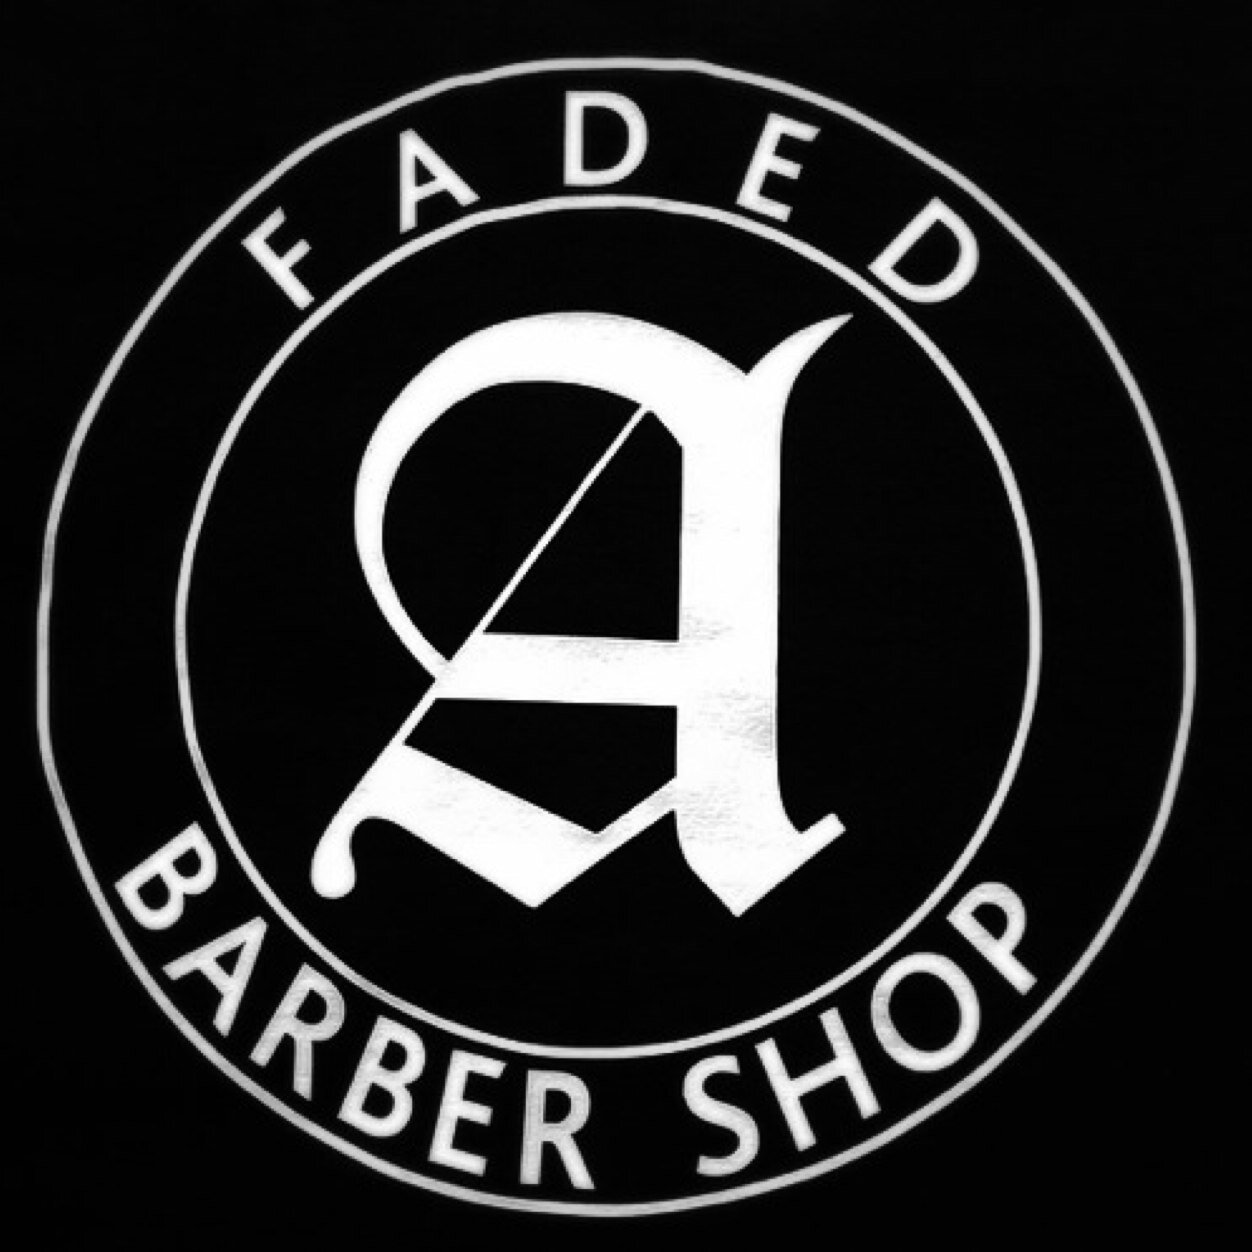 The official Twitter for AFaded Barbershop 554 Walsall road, Birmingham, B42 1LR Offering professional barber services to all hair types! For info: 07435967506